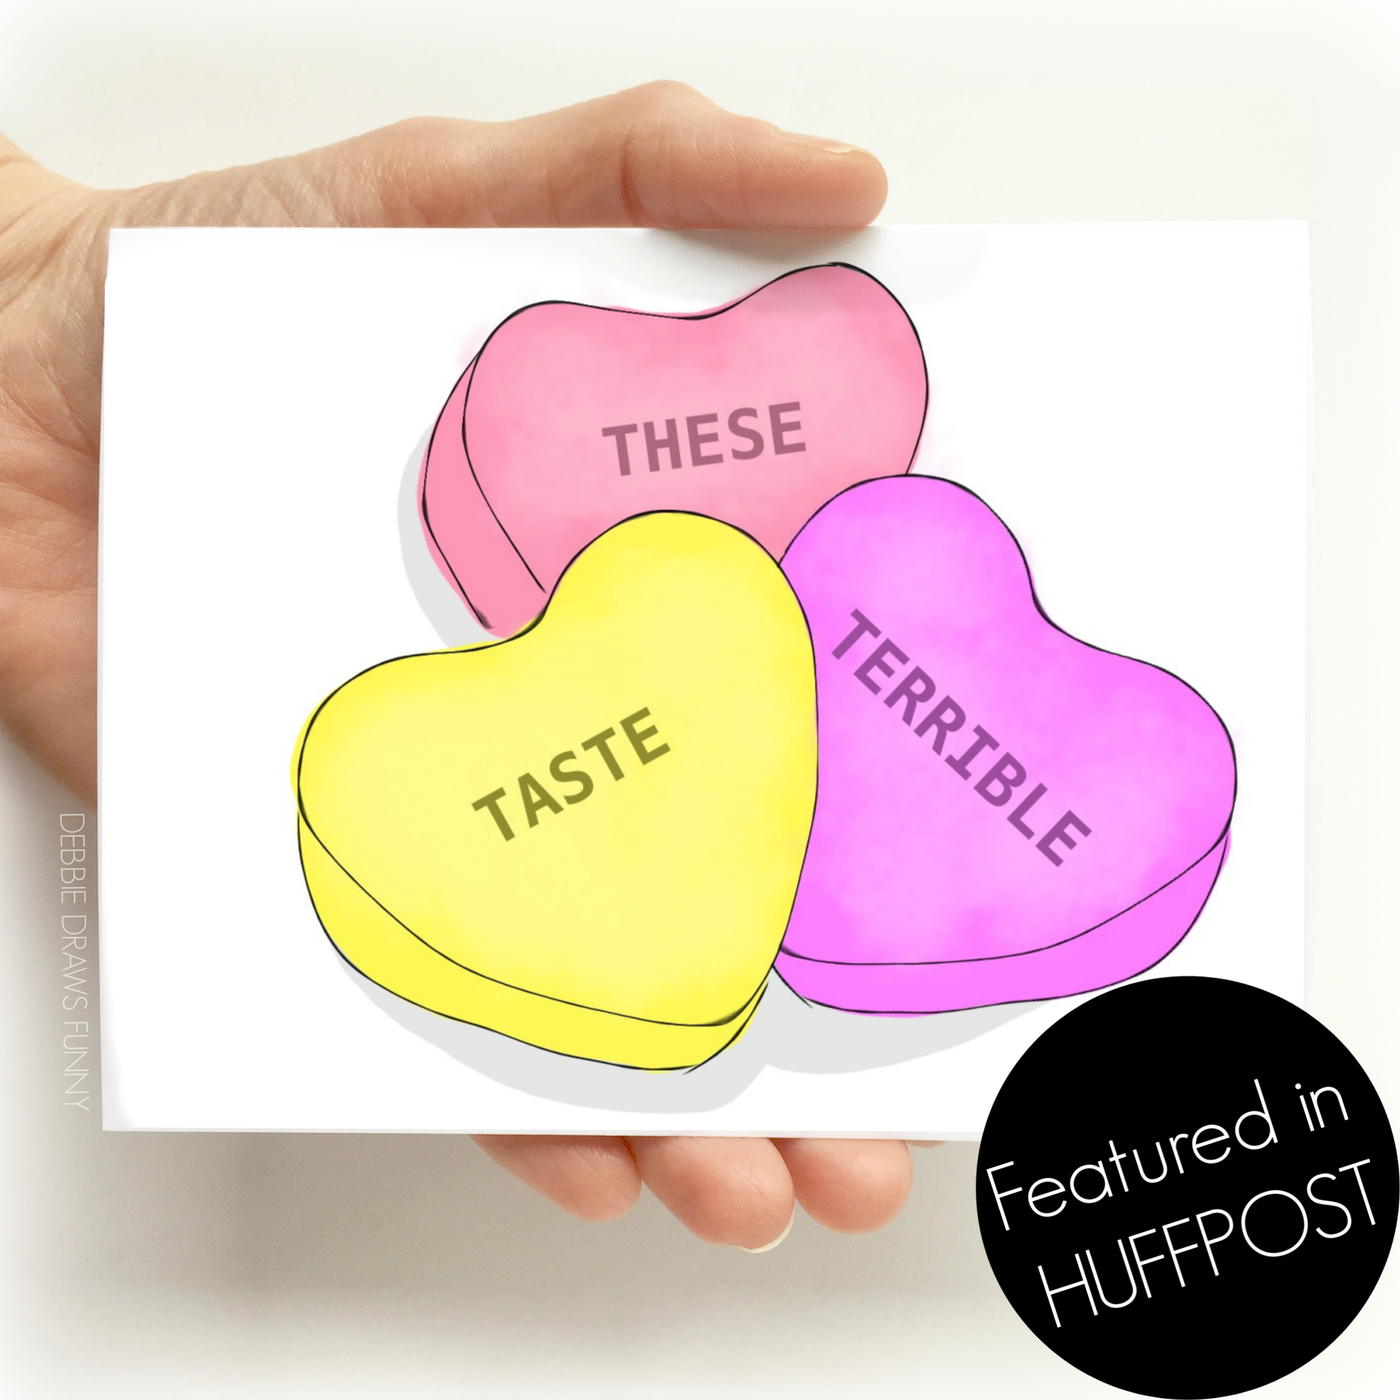 A white Valentine's day greeting card with images of three sweet Valentine's day candy hearts in colors of red, pink, and yellow and the words 'these' 'taste' 'terrible'